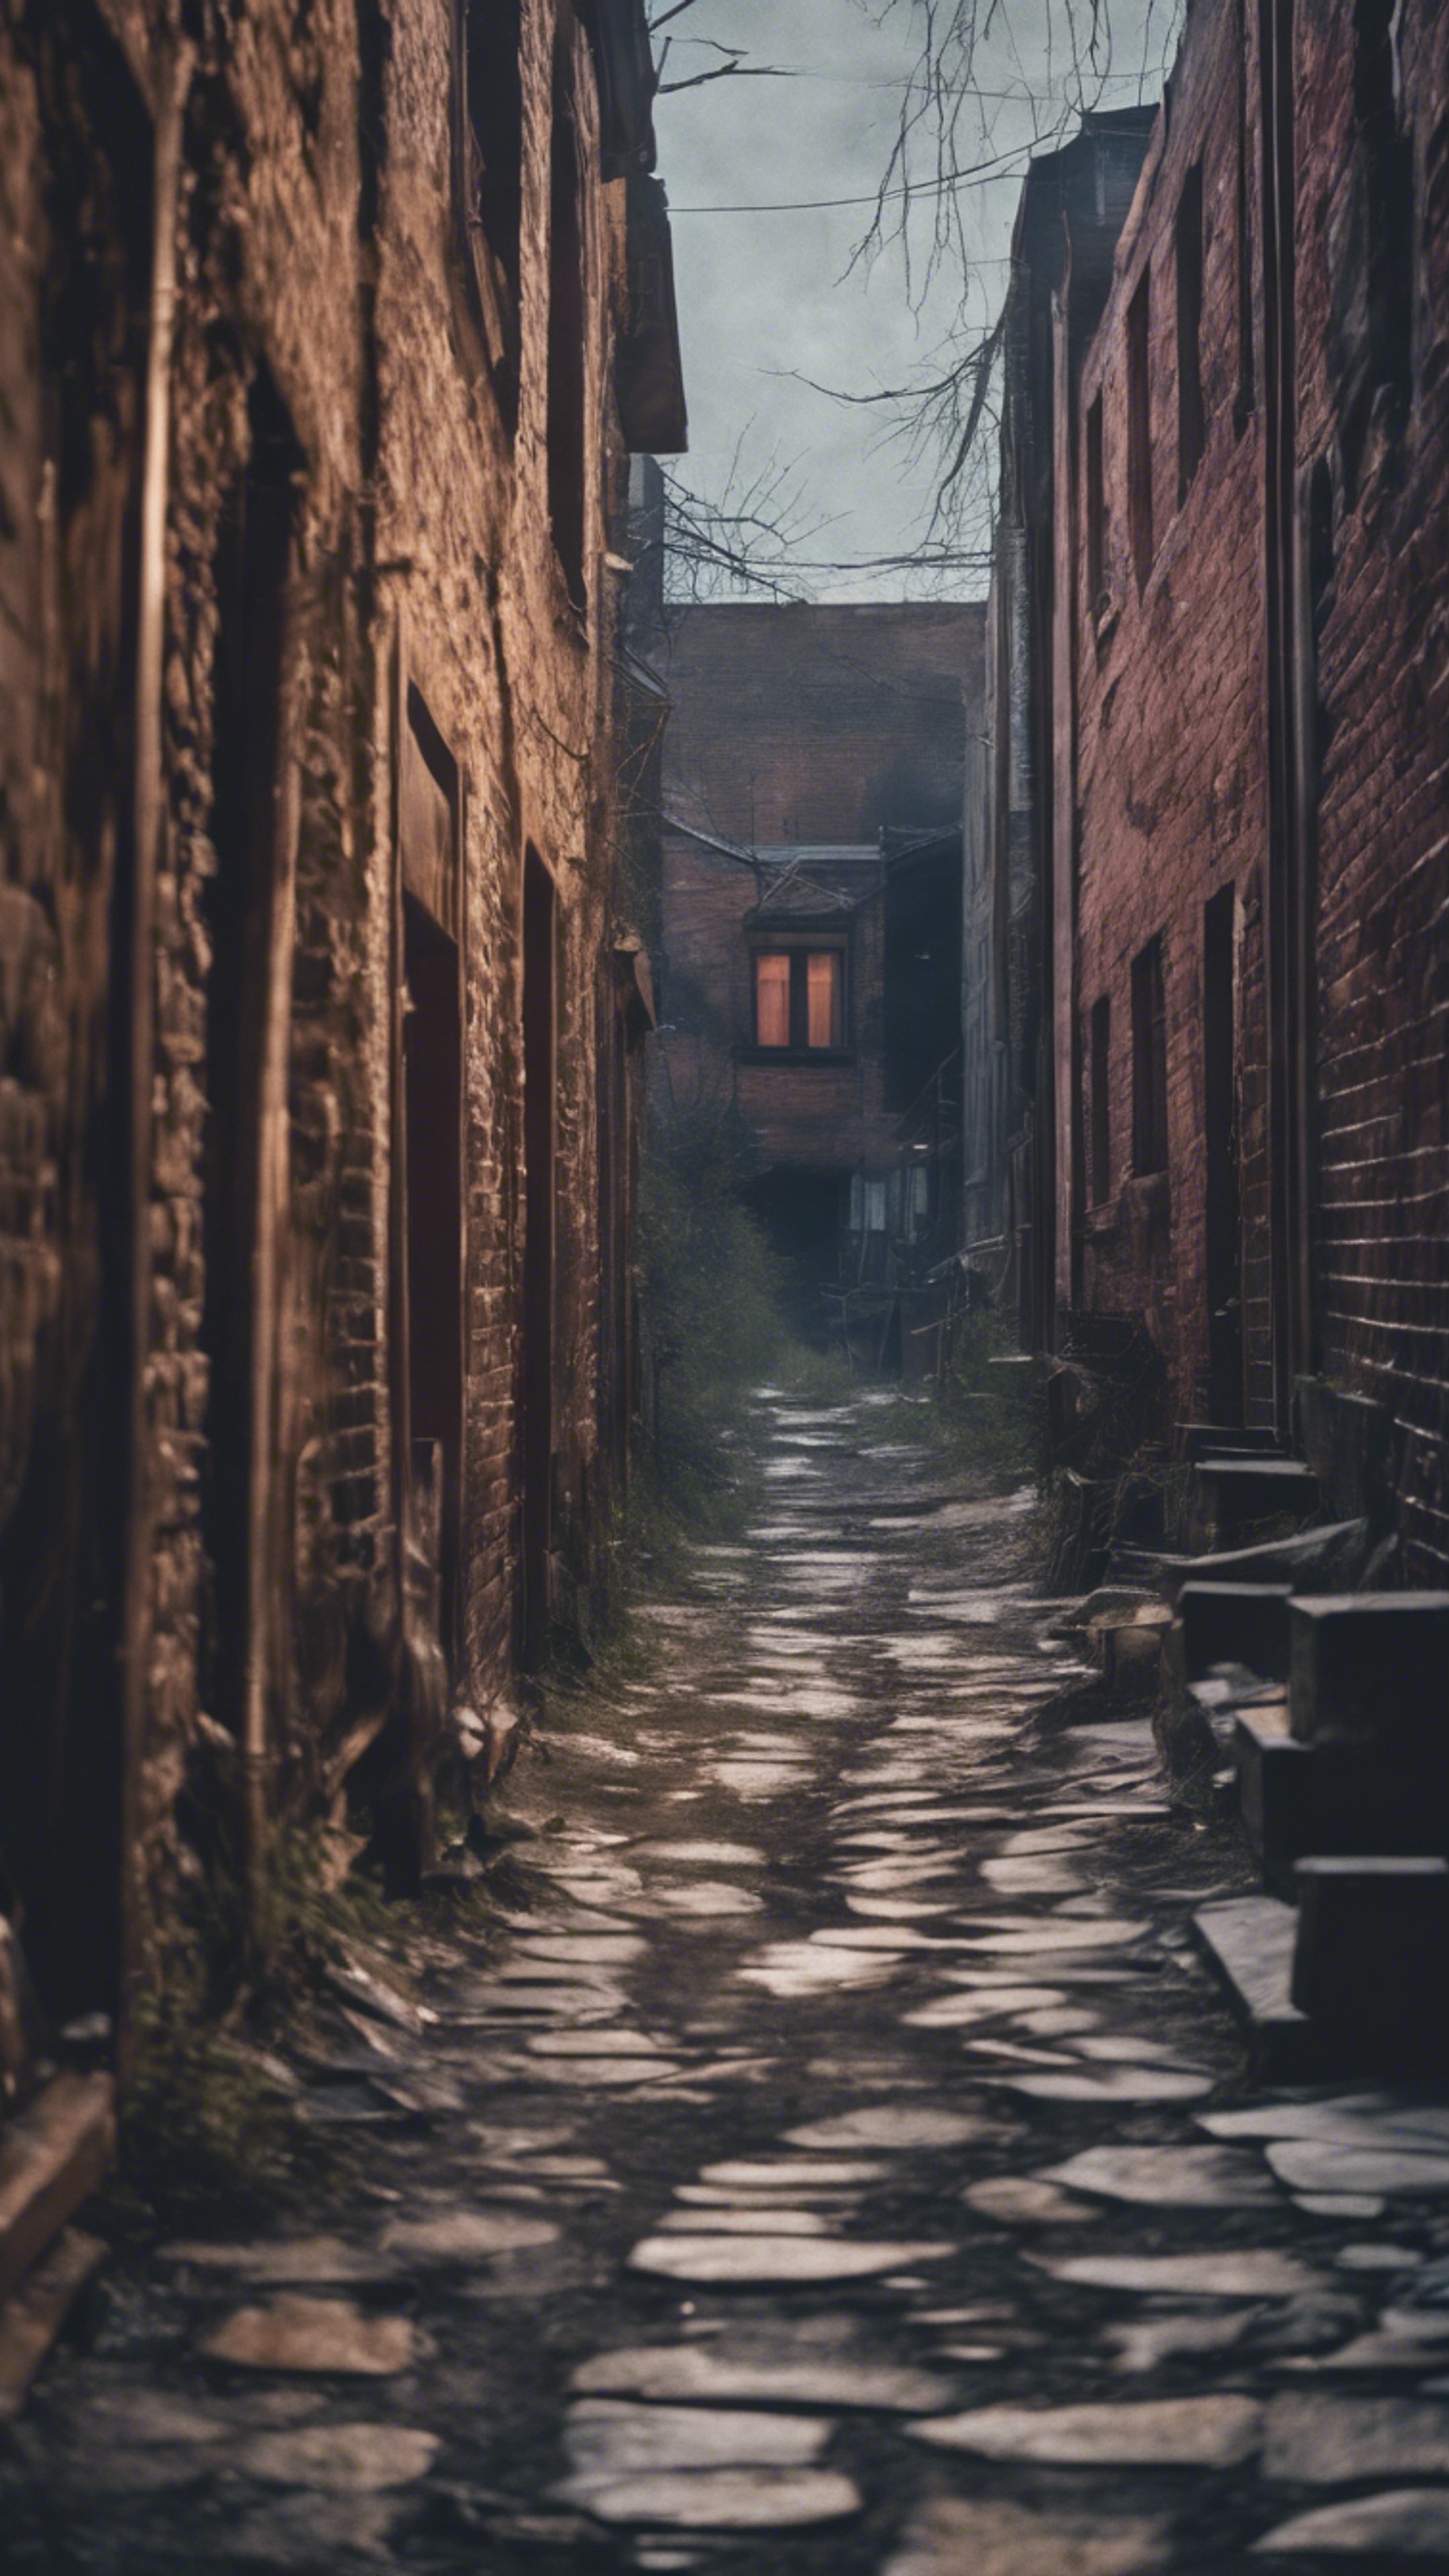 A haunted alleyway in a ghost town with spectral figures floating around. duvar kağıdı[5b53dba013a8448c806a]